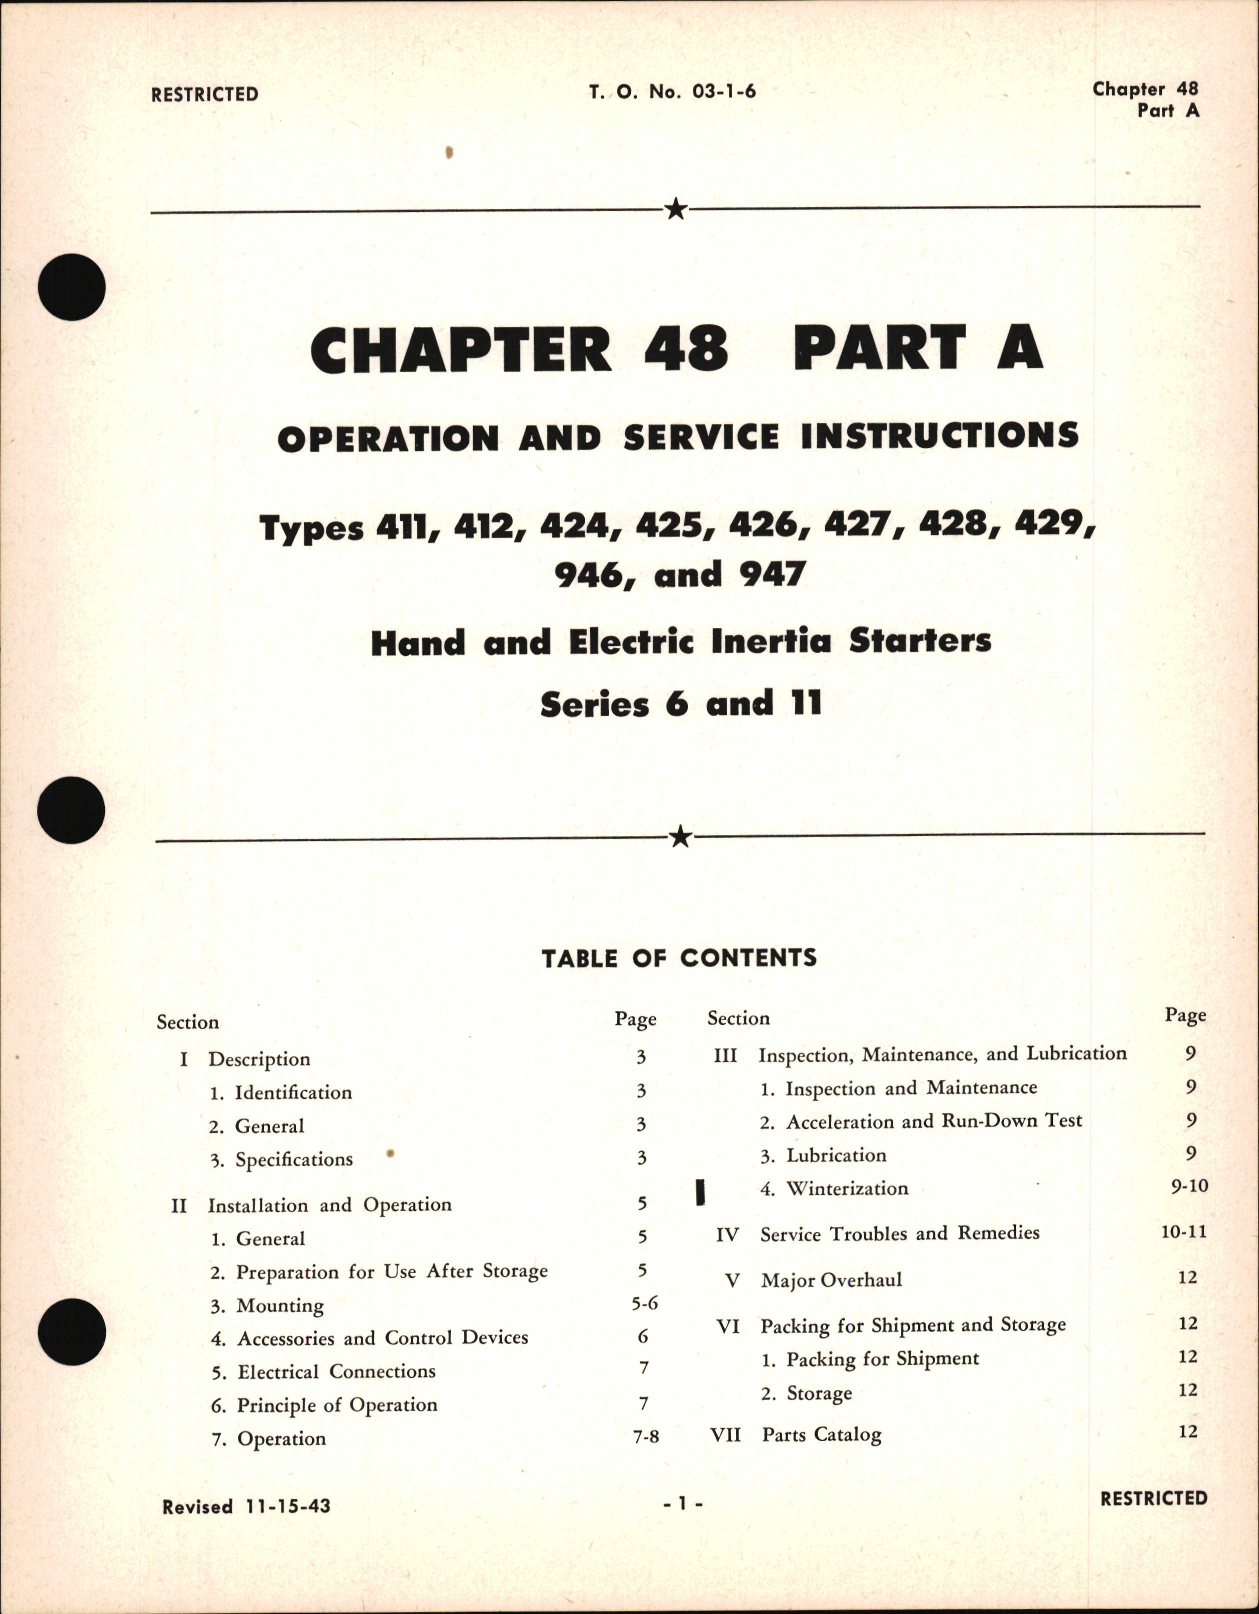 Sample page 1 from AirCorps Library document: Operation and Service Instruction for Hand and Electric Inertia Starters for Series 6 and 11, Ch 48 Part A